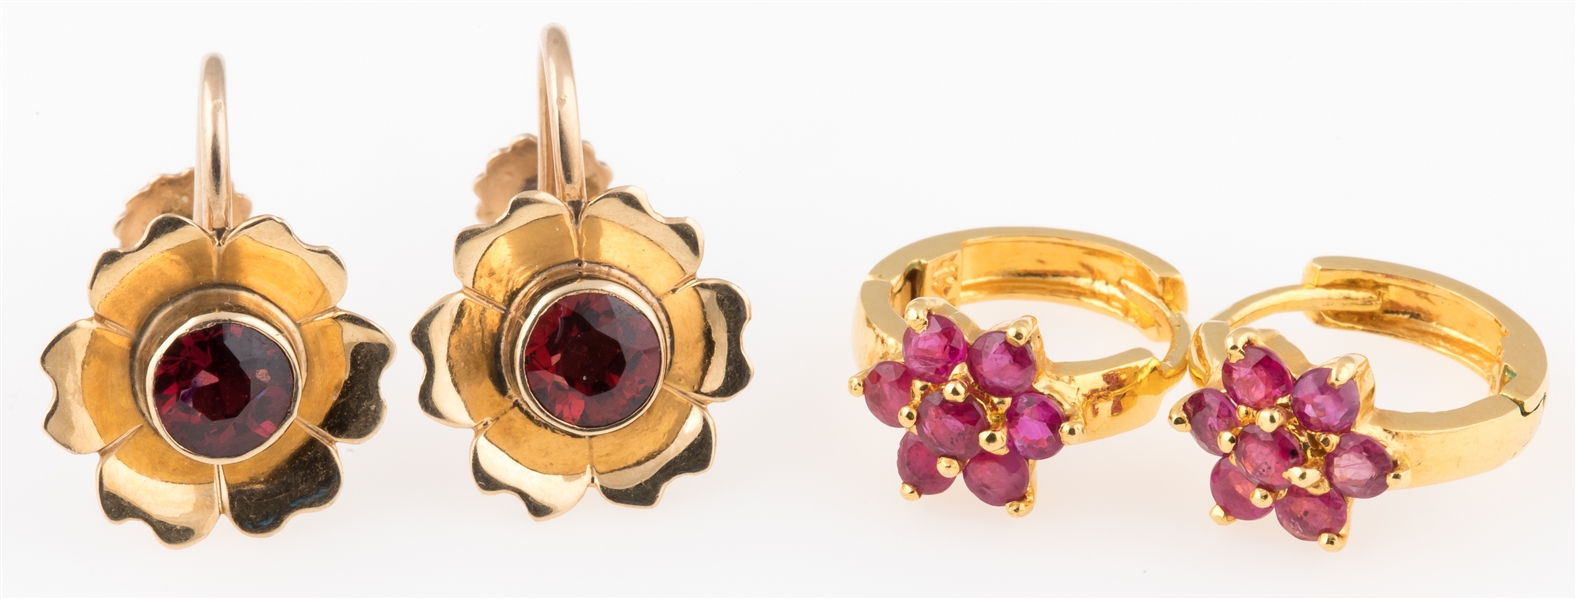 TWO PAIRS OF 14K GOLD EARRINGS WITH GARNET AND RUBY